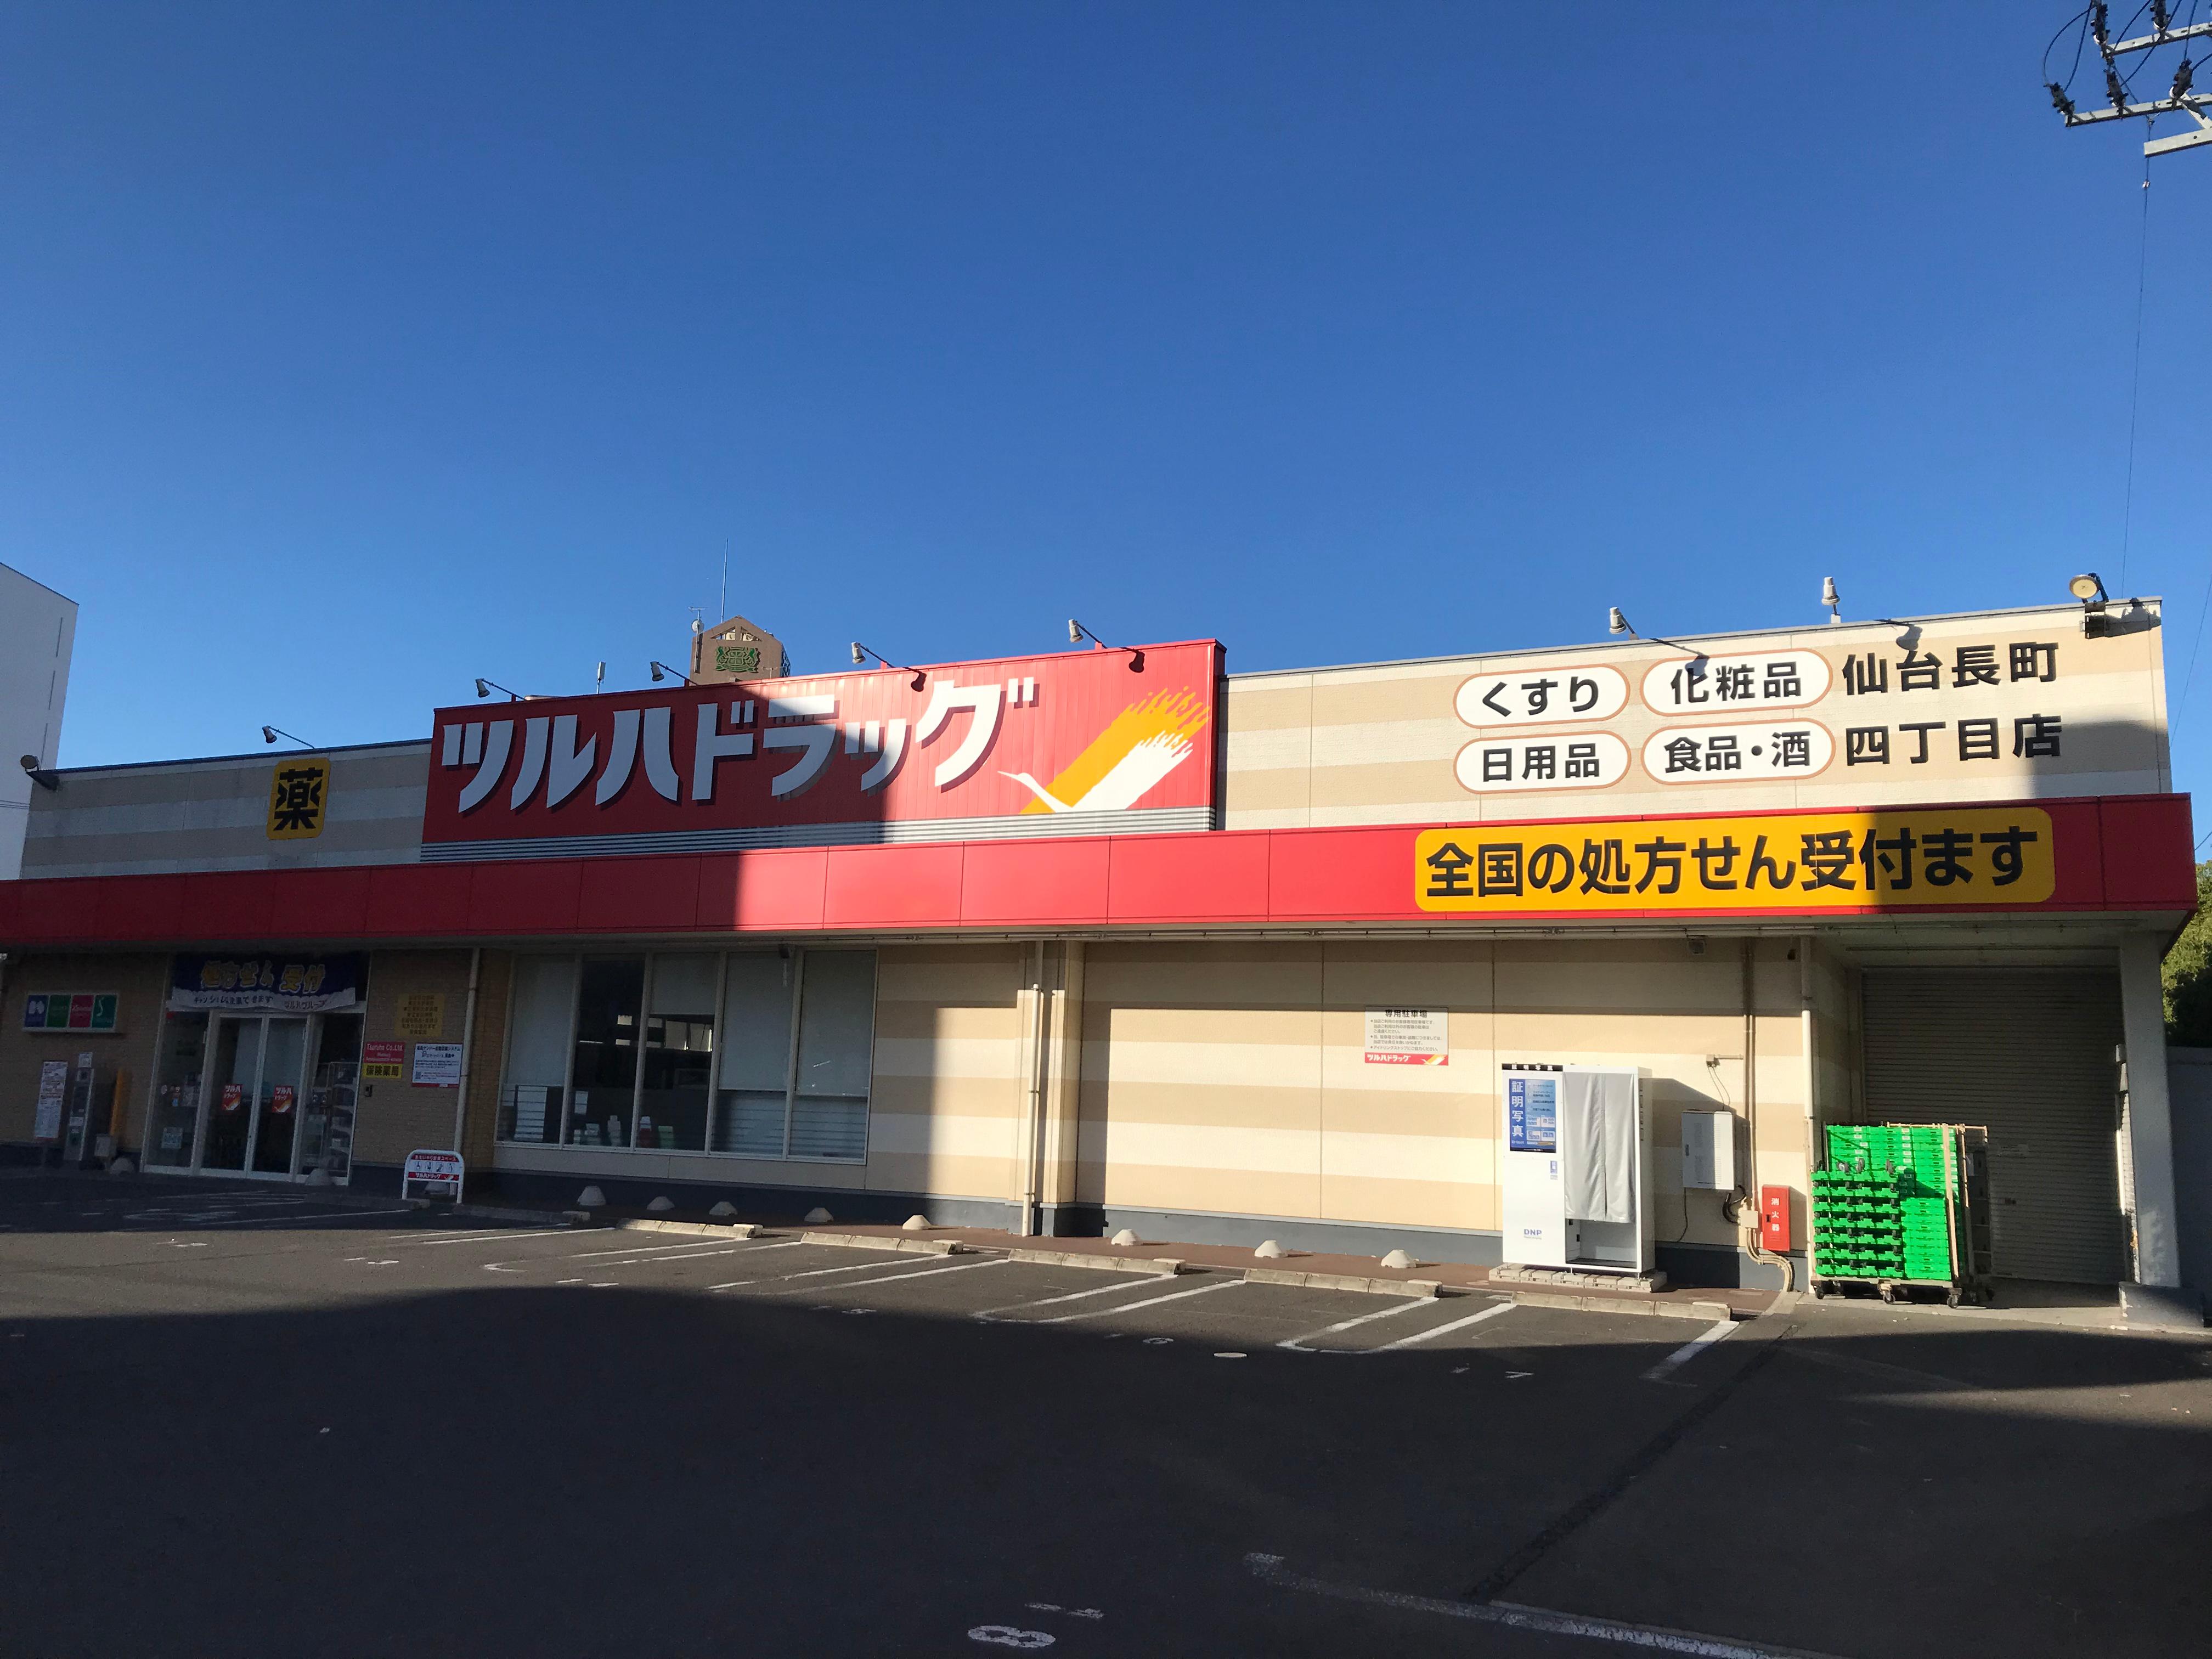 Images ツルハドラッグ 仙台長町4丁目店